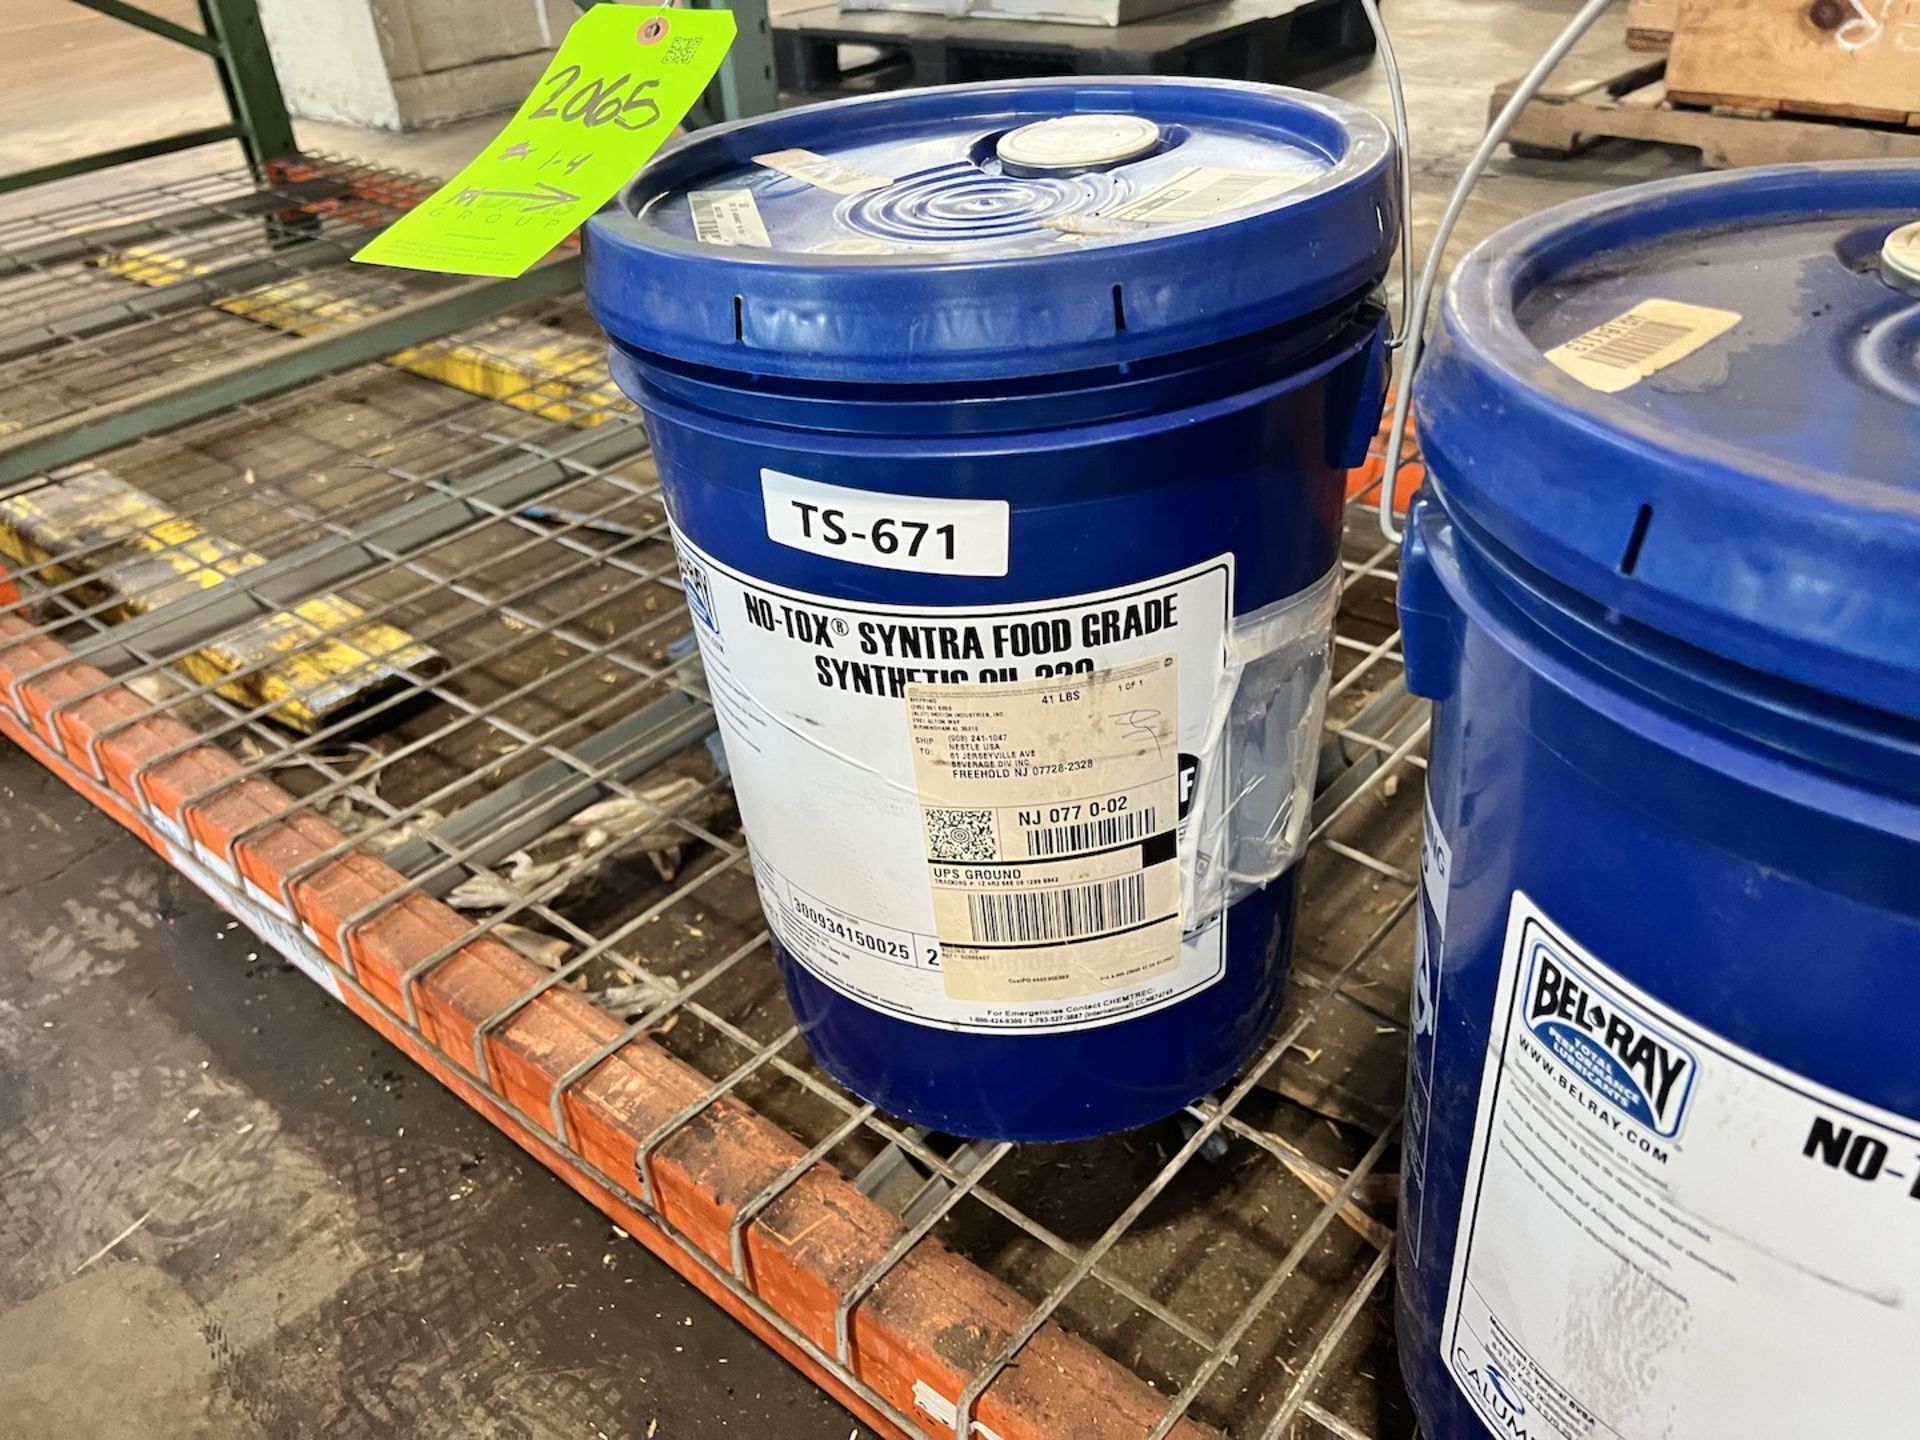 (4) Belray No Tox Synthetic Food Grade Oil 220, Product Code # 300934150025, 5 Gallon Pails - Image 5 of 5